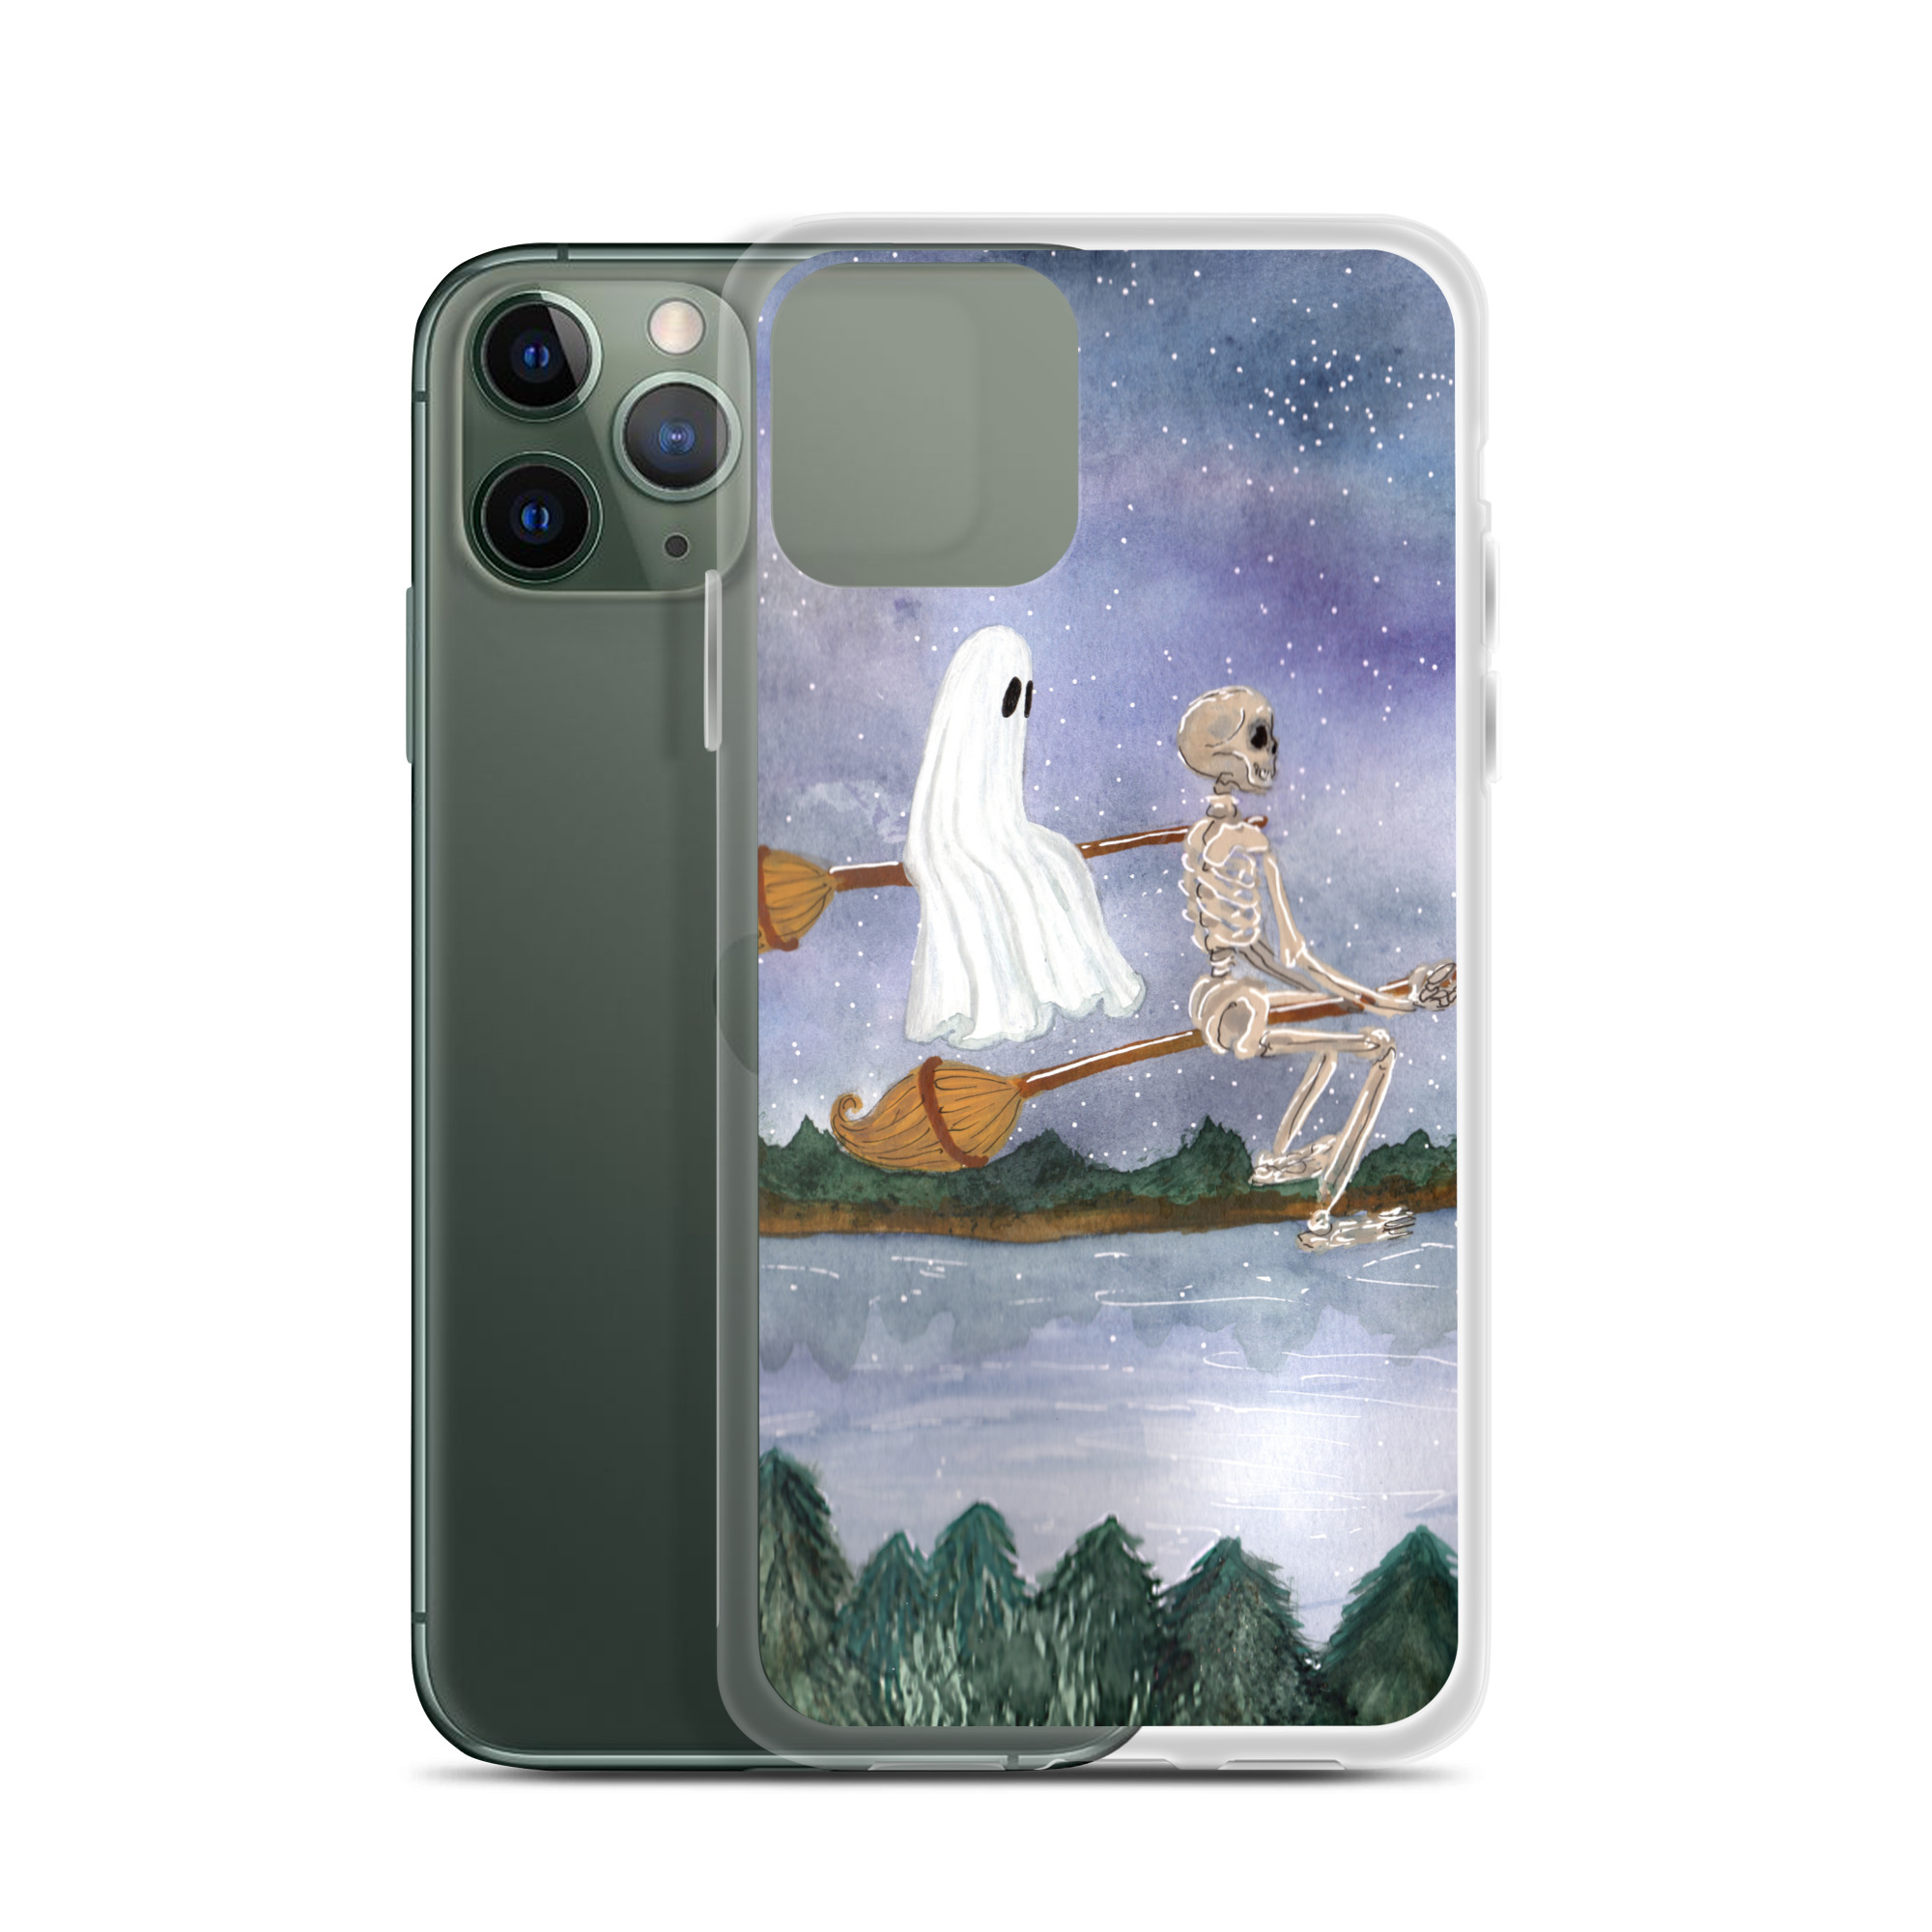 iphone-case-iphone-11-pro-case-with-phone-62eed9fea7830.jpg